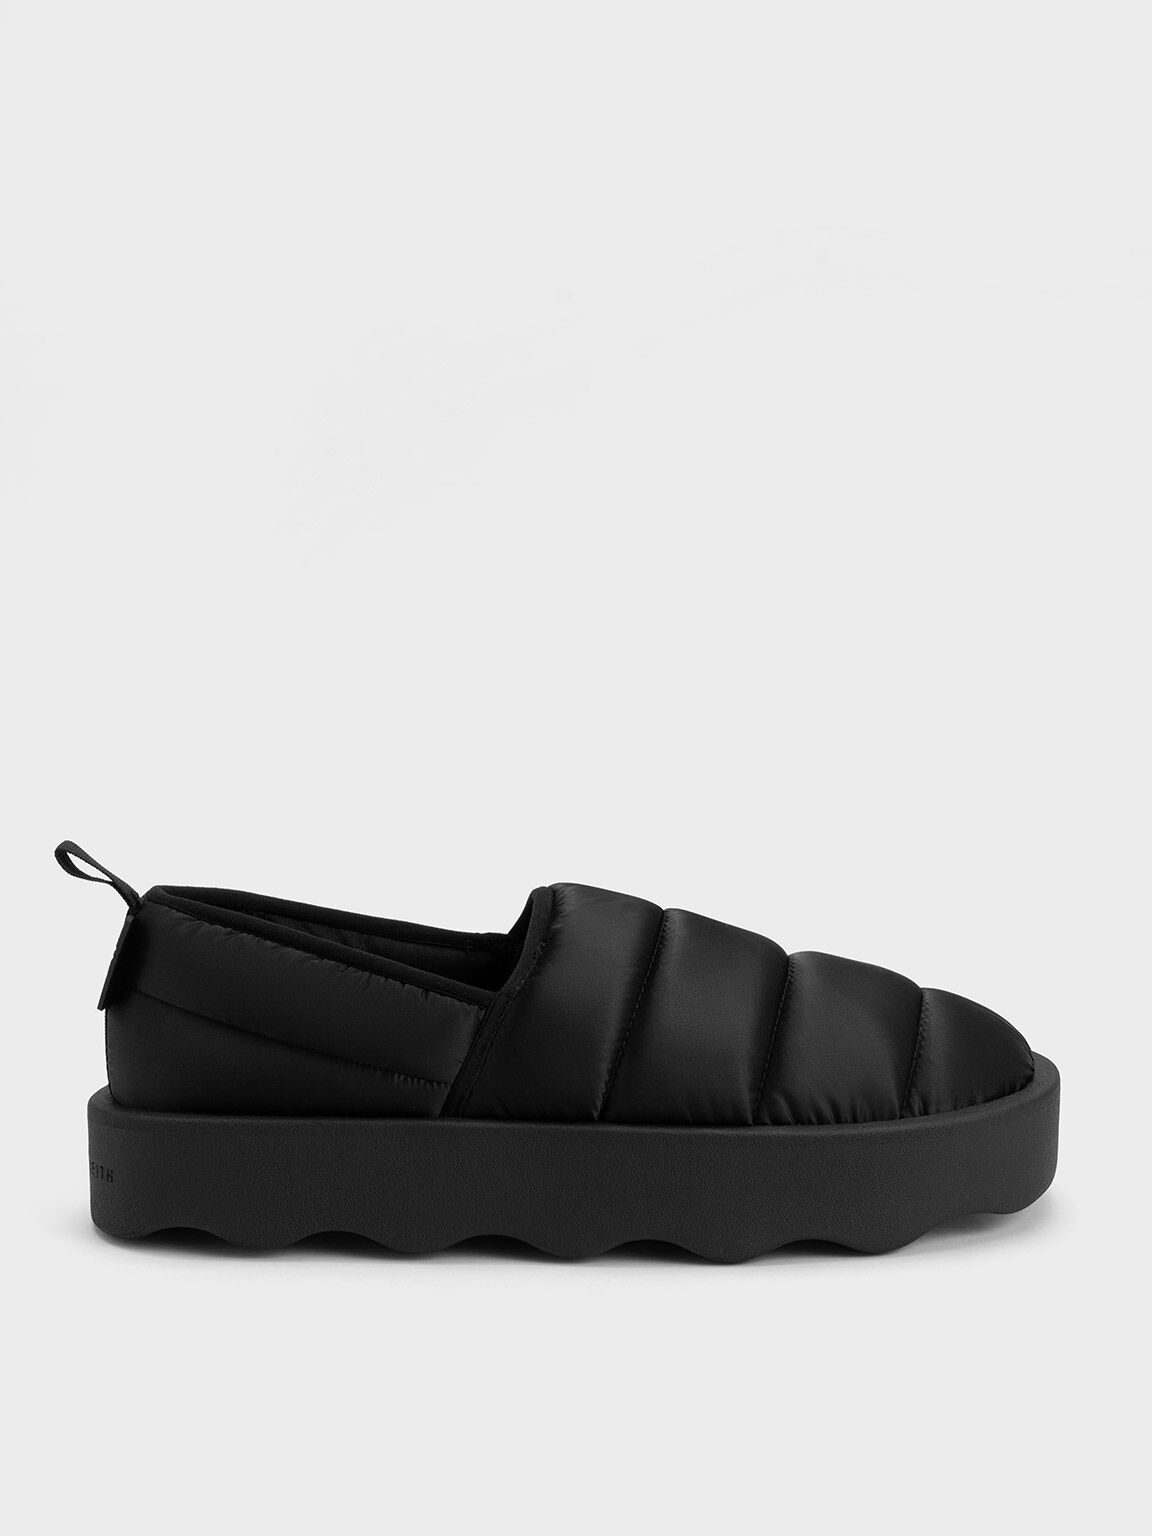 Puffy Nylon Panelled Loafers, Black, hi-res